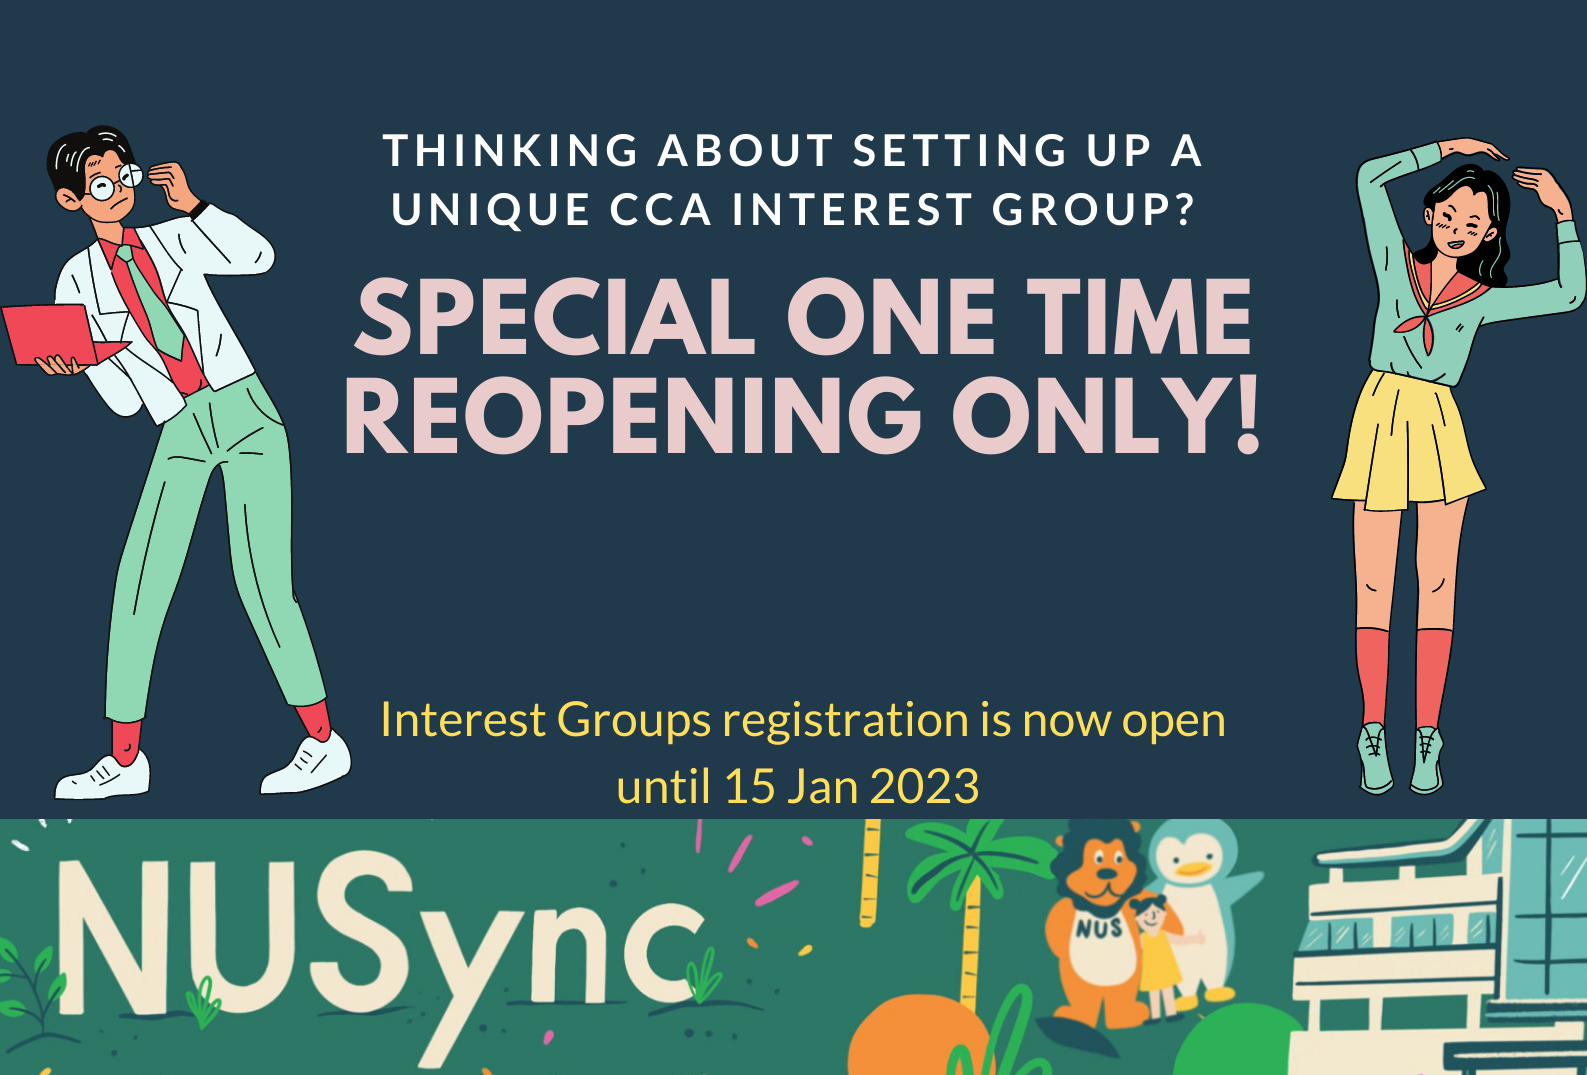 HAve you thought about setting up a unique CCA Interest Group